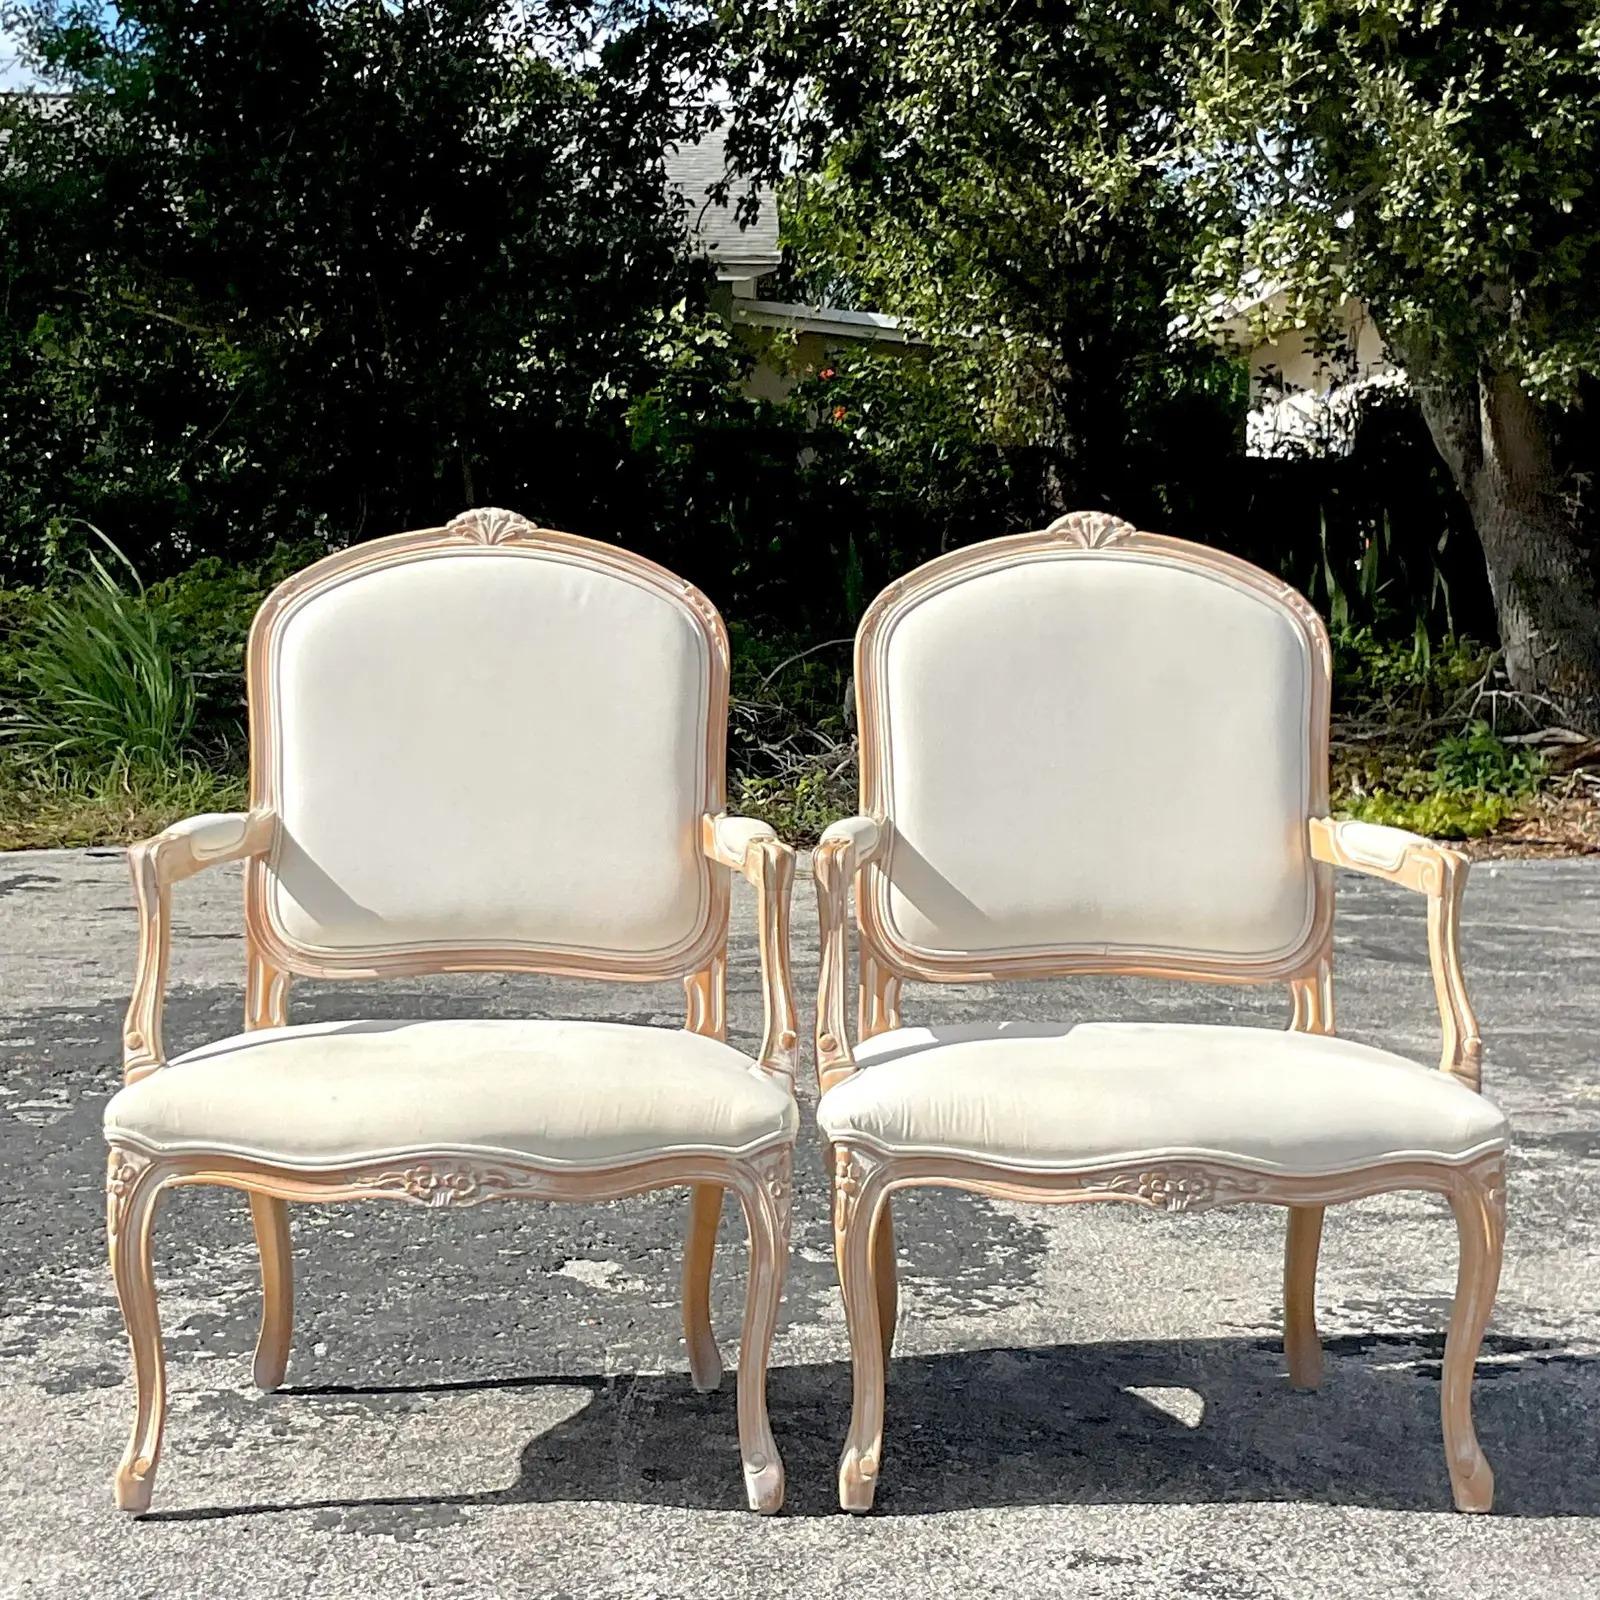 Vintage Regency Bergere Chairs - A Pair In Good Condition For Sale In west palm beach, FL